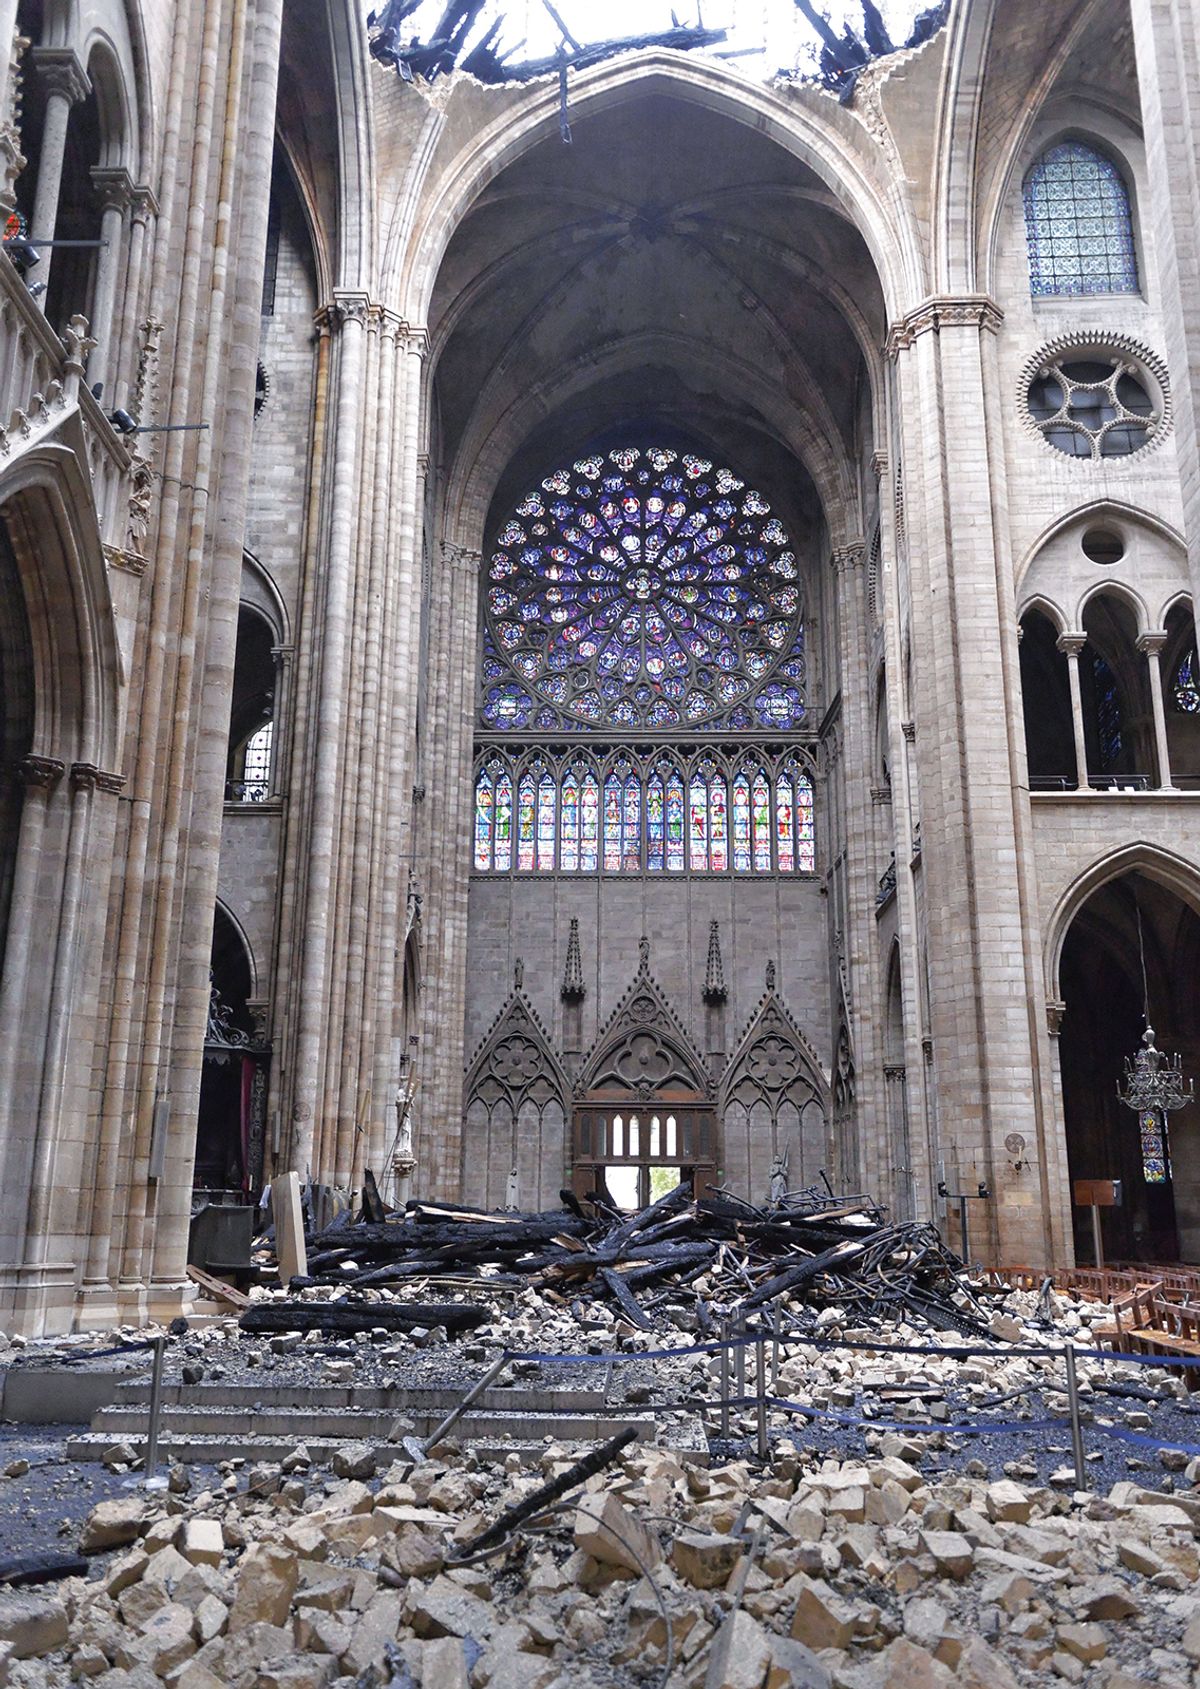 Debris inside Notre Dame after the catastrophic fire; the rose window appears to be intact, but the glass may have suffered from micro-cracks, requiring time-consuming repairs Photo: Bastien Louvet/SIPA/REX/Shutterstock; © 2019 Shutterstock